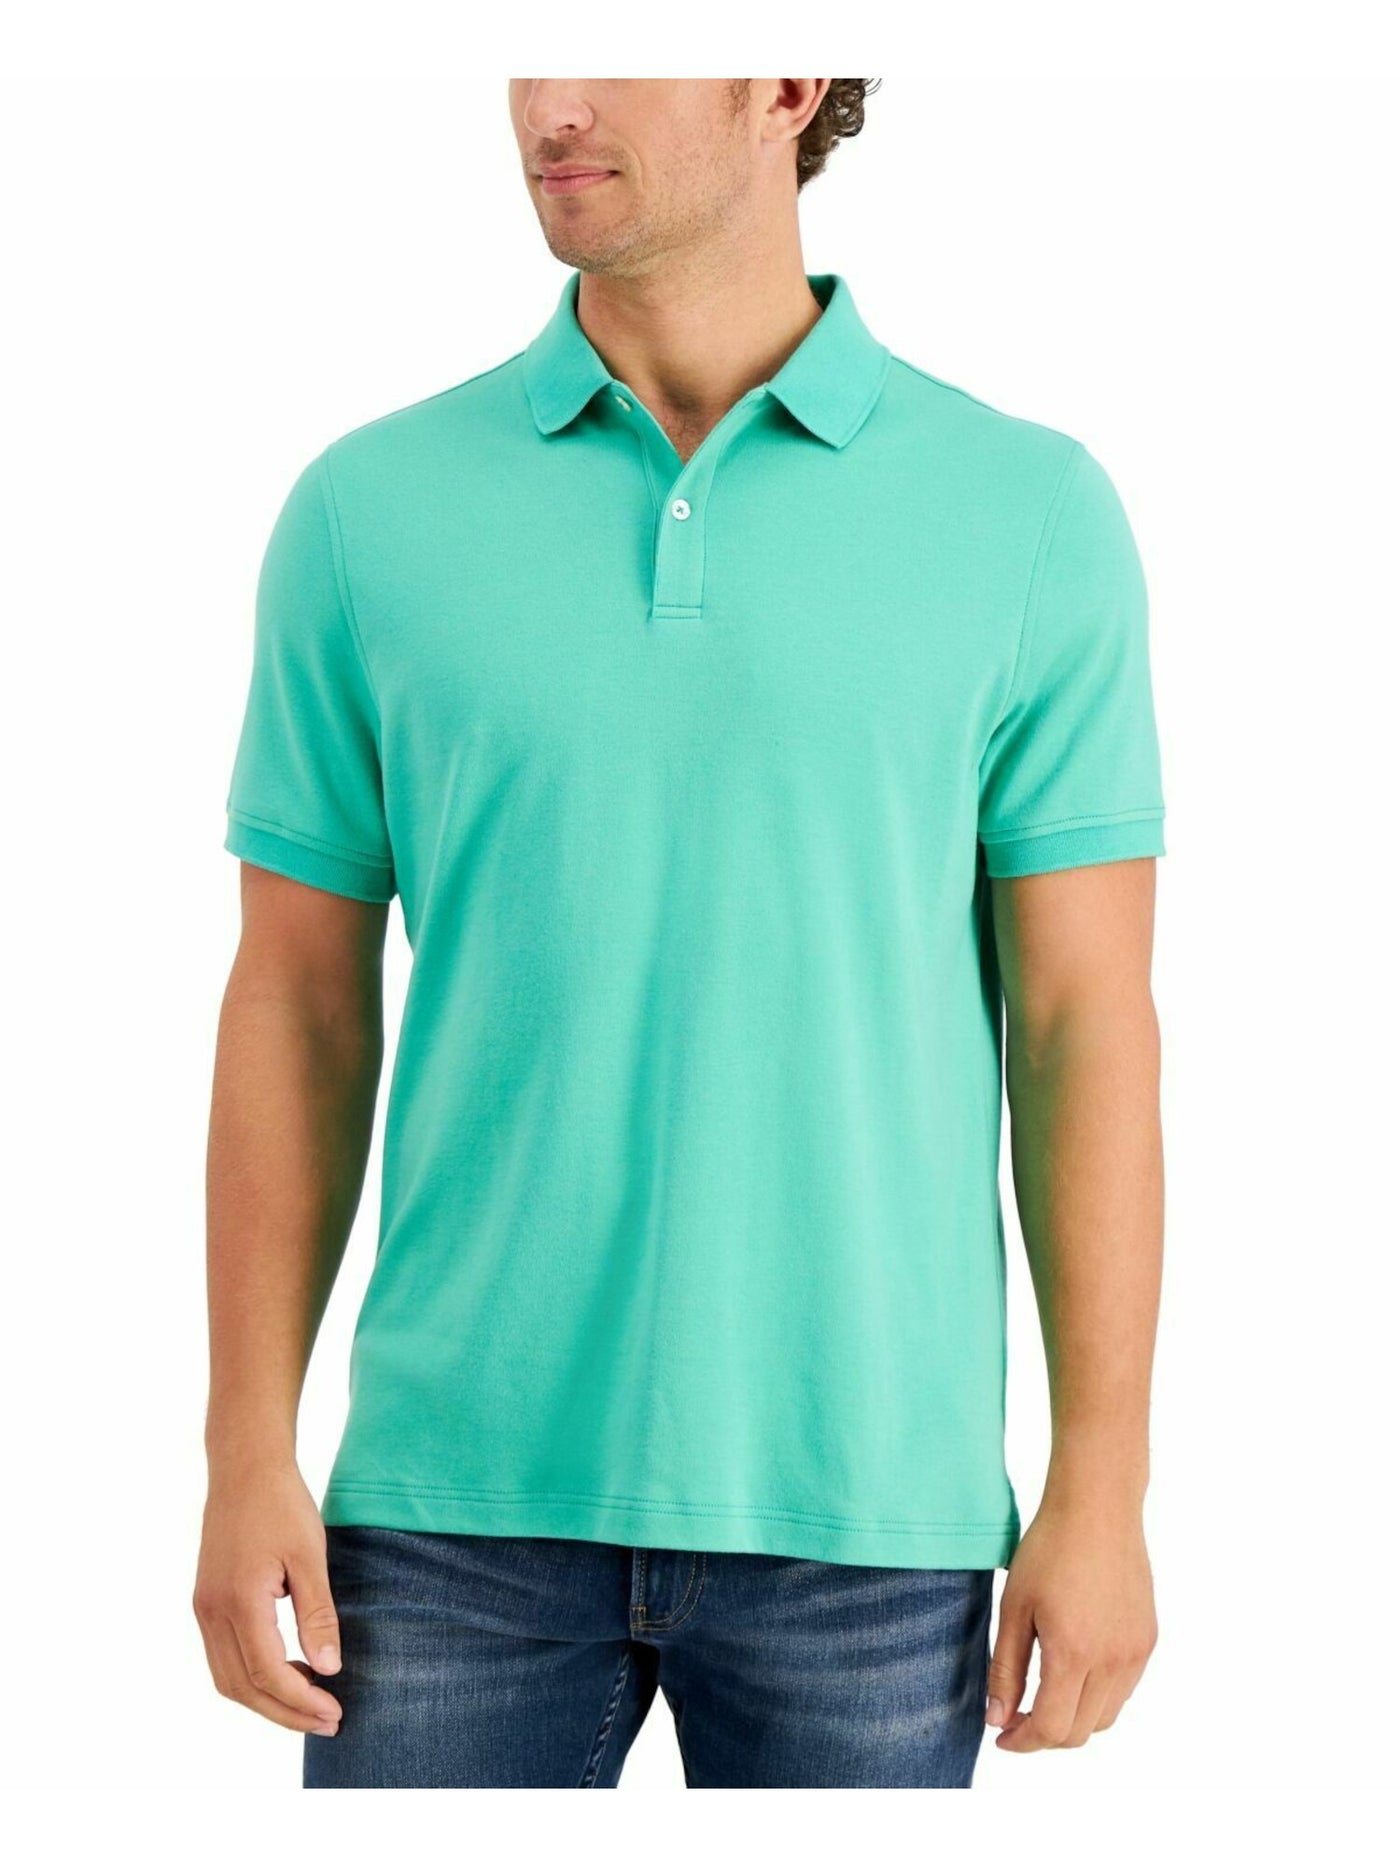 CLUBROOM Mens Soft Touch Interlock Green Classic Fit Polo S